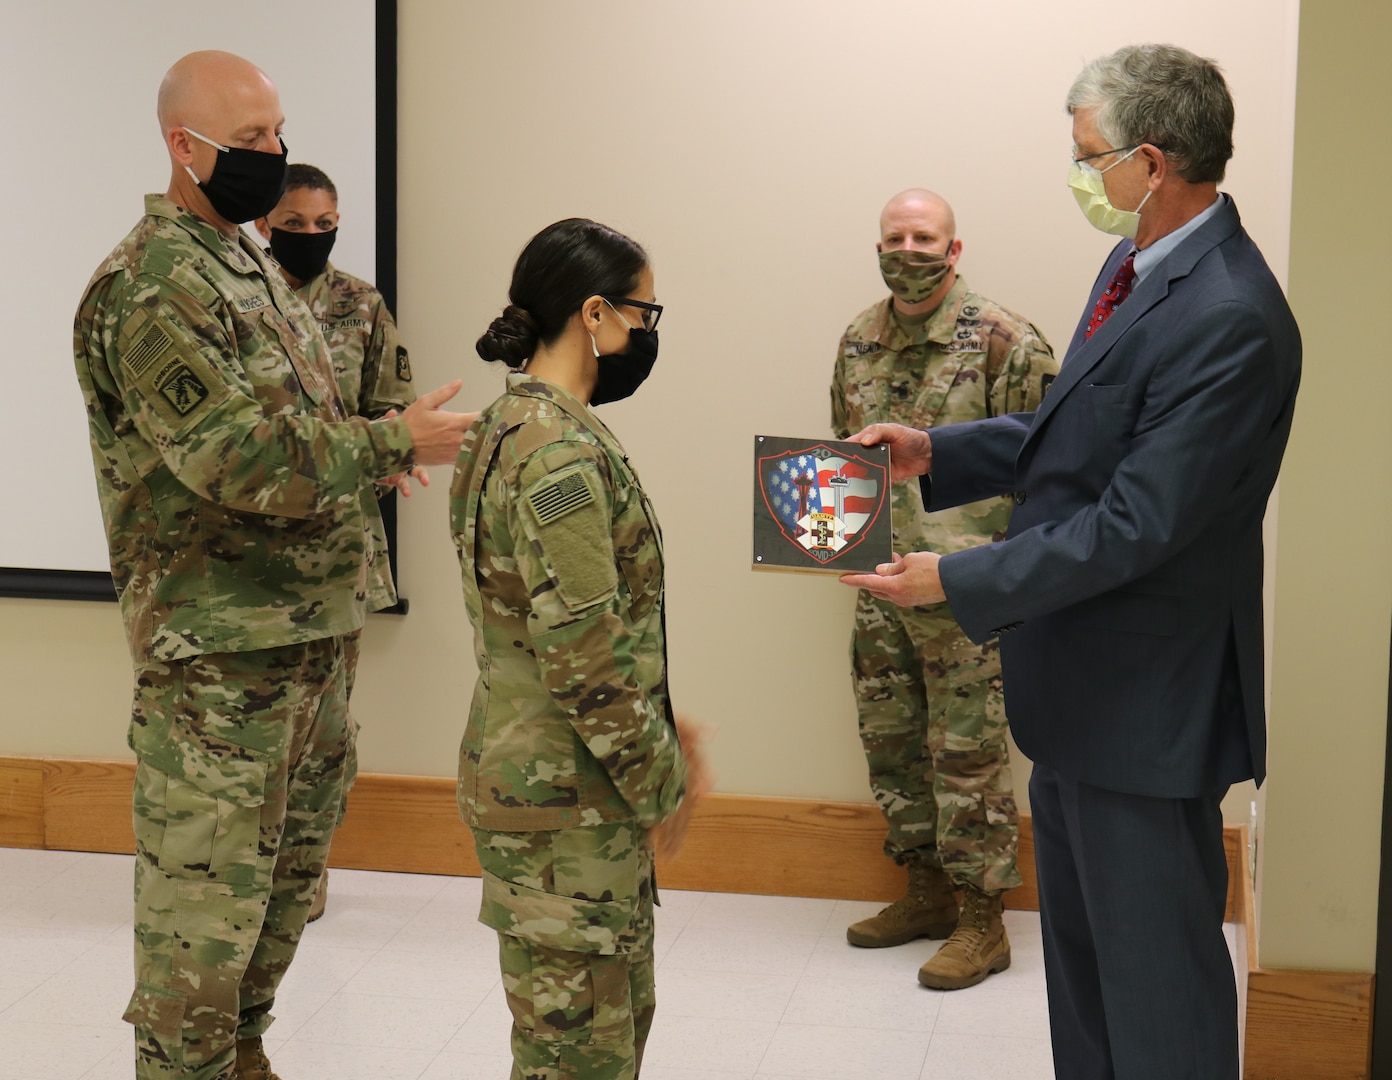 Two Soldiers presenting a plaque to a man.